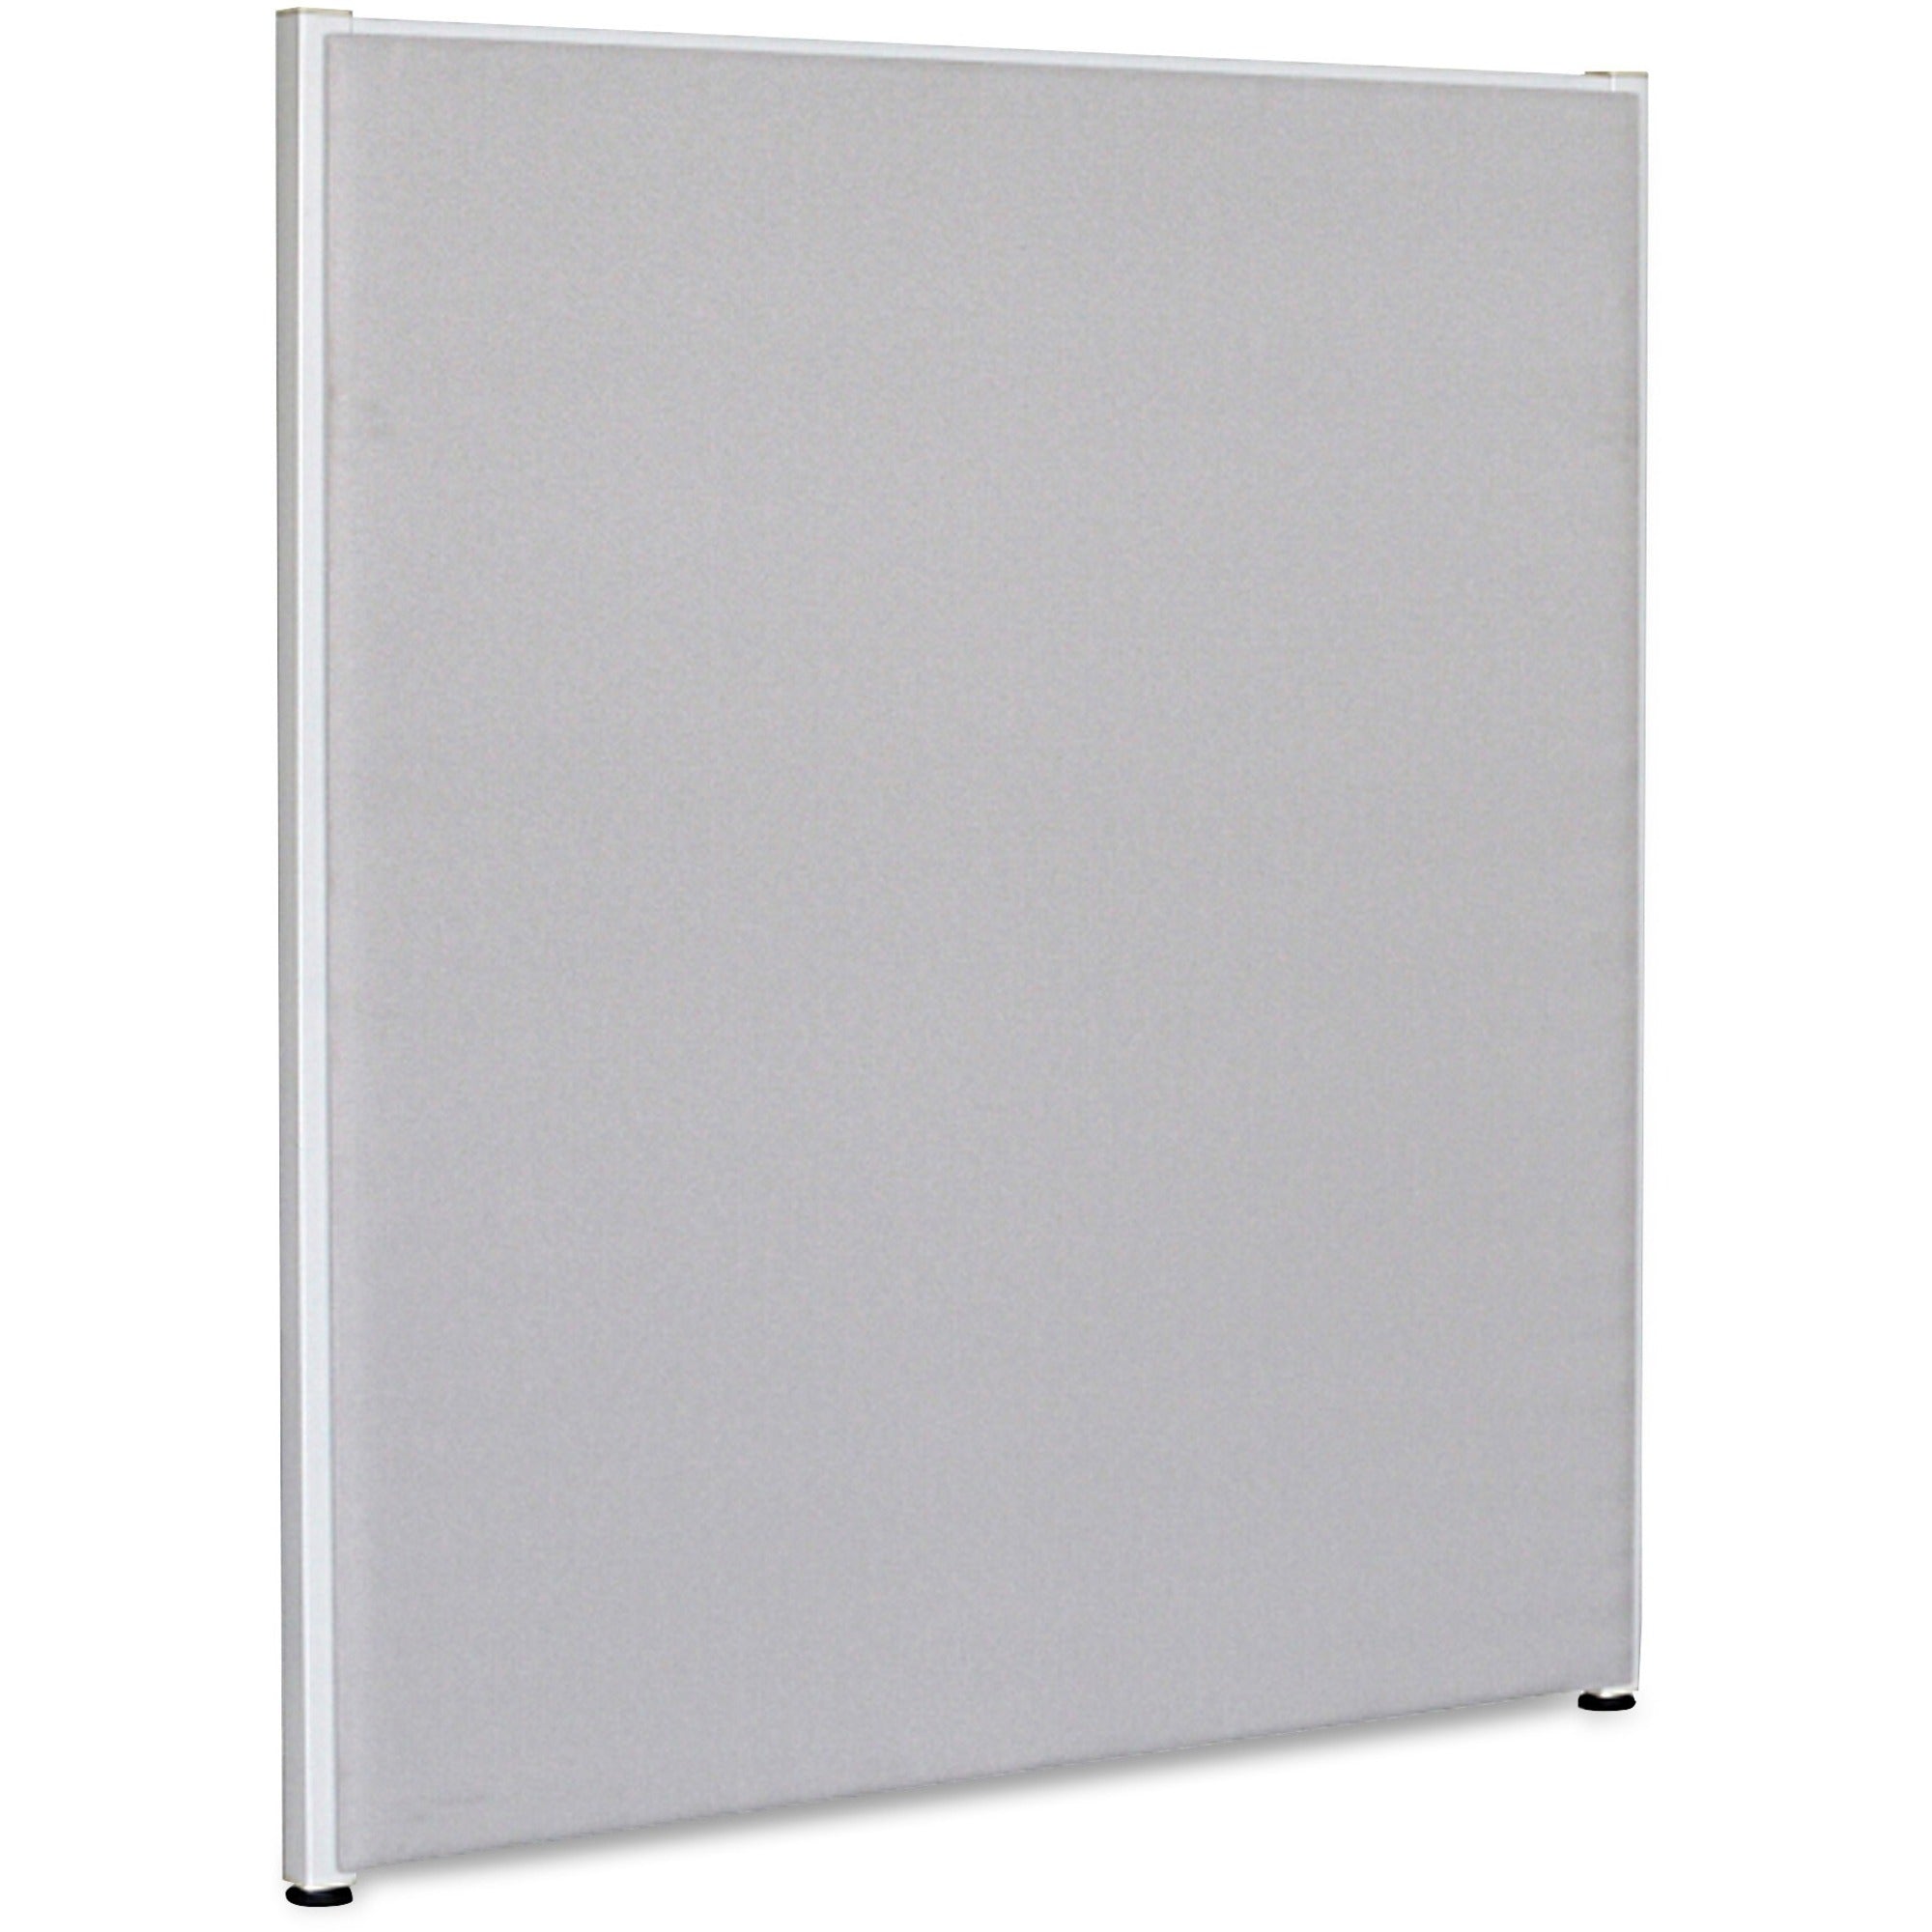 lorell-panel-system-partition-fabric-panel-30-width-x-48-height-fabric-steel-gray-1-each_llr90268 - 1